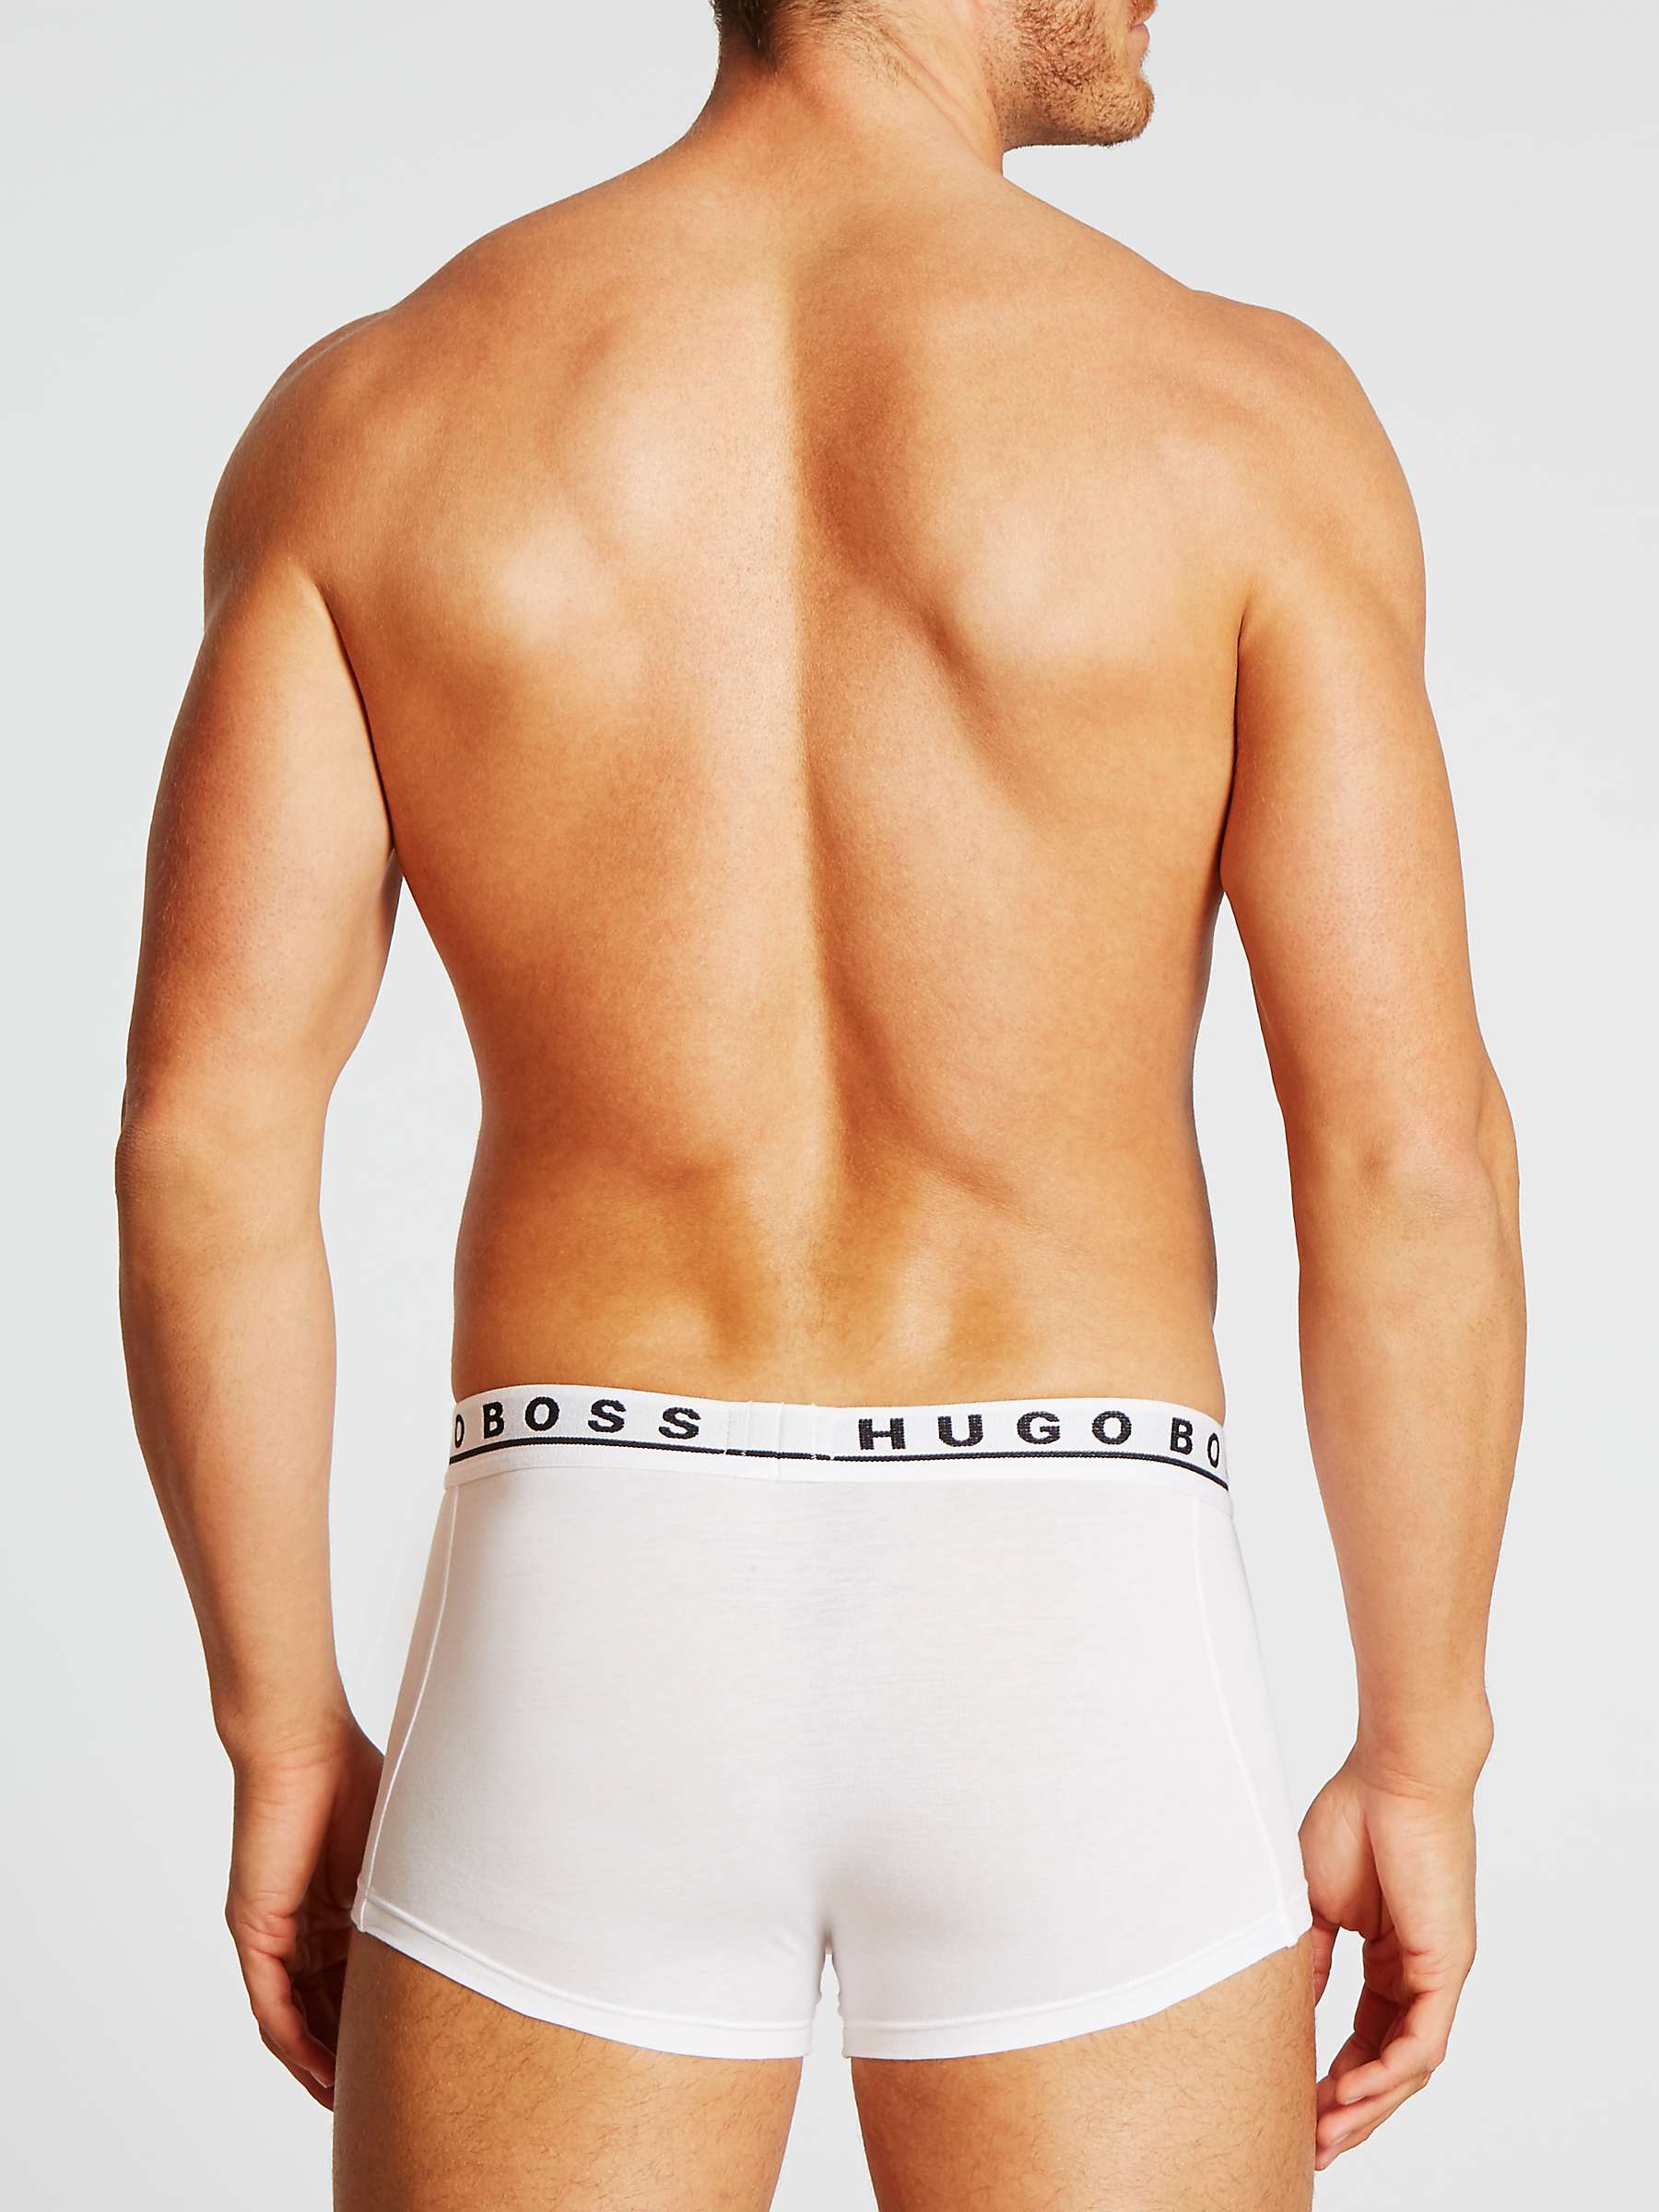 Buy BOSS Stretch Cotton Trunks, Pack of 3 Online at johnlewis.com